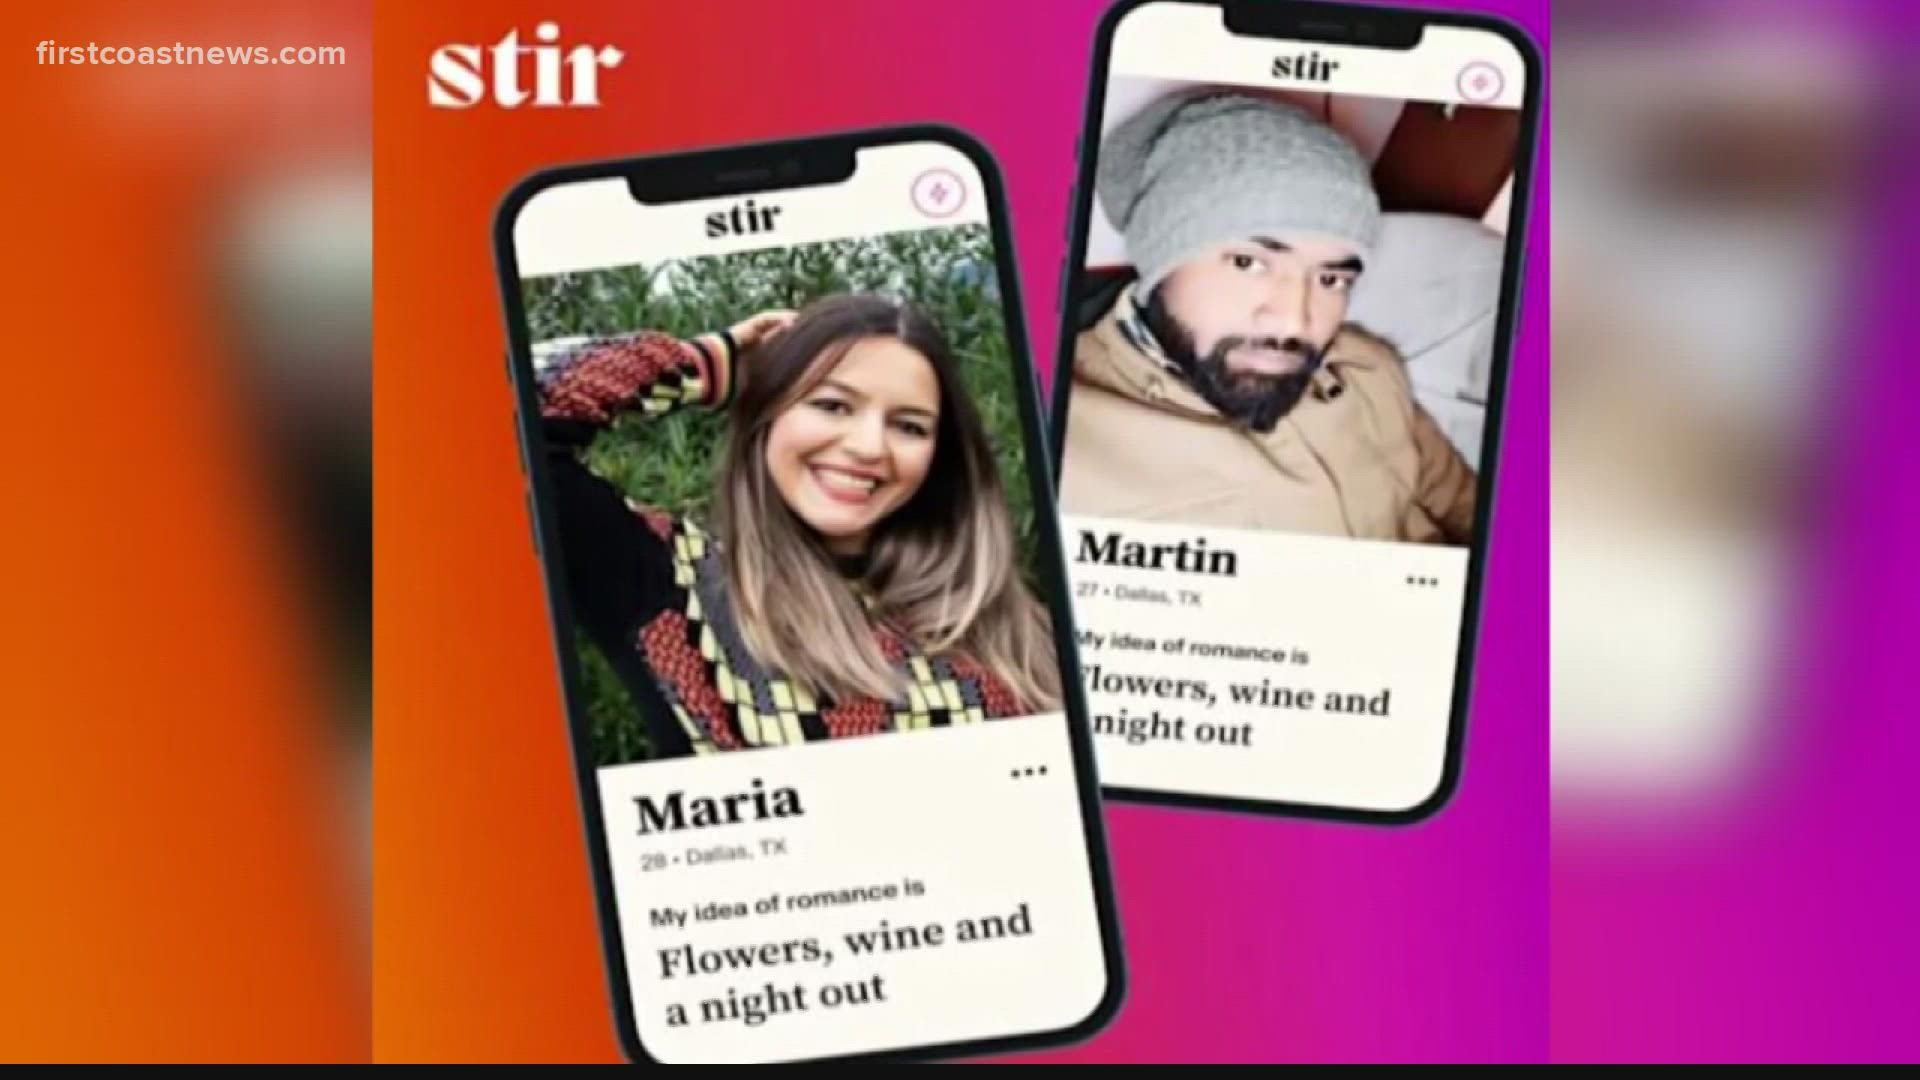 Stir launched earlier this week to help remove barriers some single parents feel when it comes to dating.